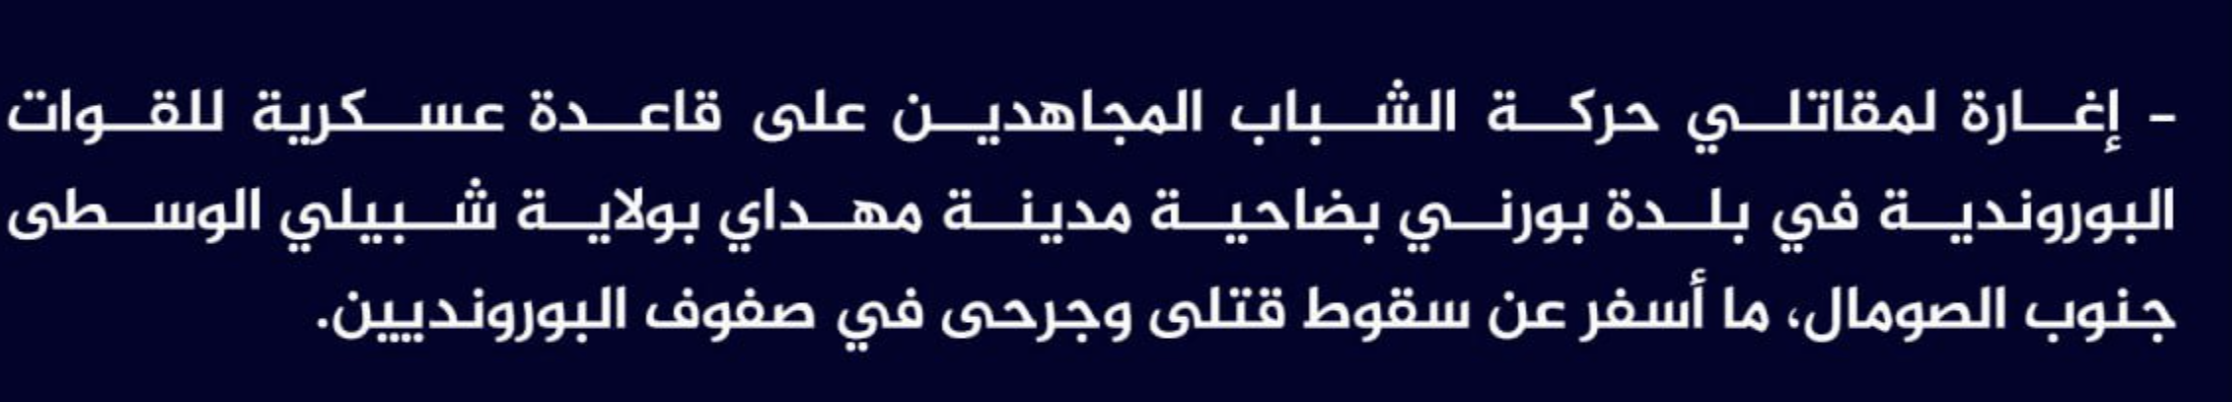 (Claim) al-Shabaab Attacked a Burundian Military Base Killing and Injuring Several in Borni Town, Mahdai City, Middle Shabelle State, Southern Somalia - 7 March 2023